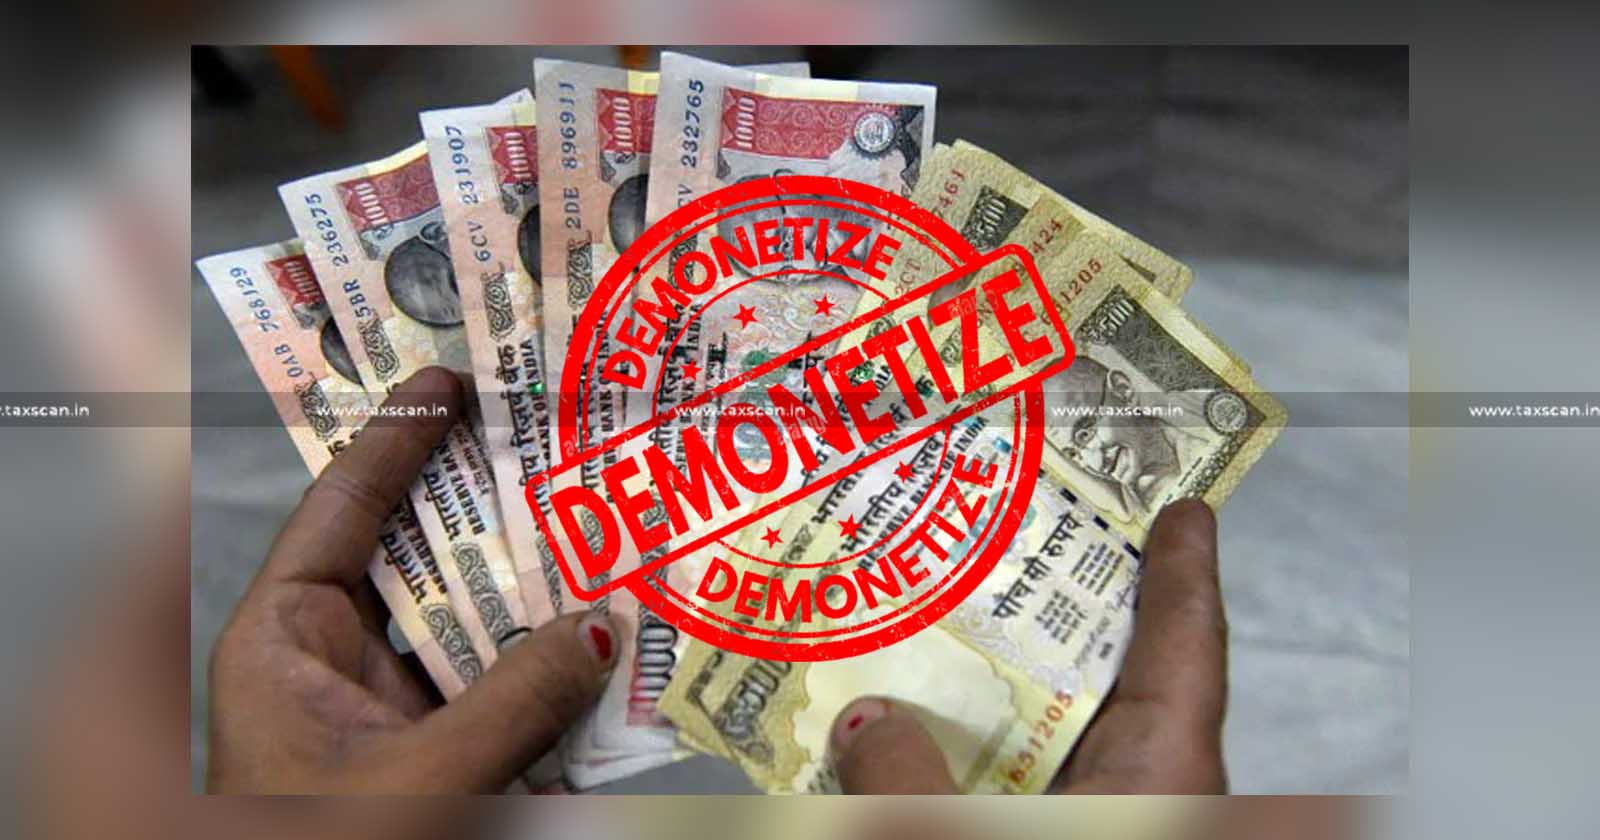 Huge Cash Deposit - Demonetized Currency - Violation of Provisions - ITAT upholds Revision Order - ITAT - Revision Order - Income Tax - taxscan